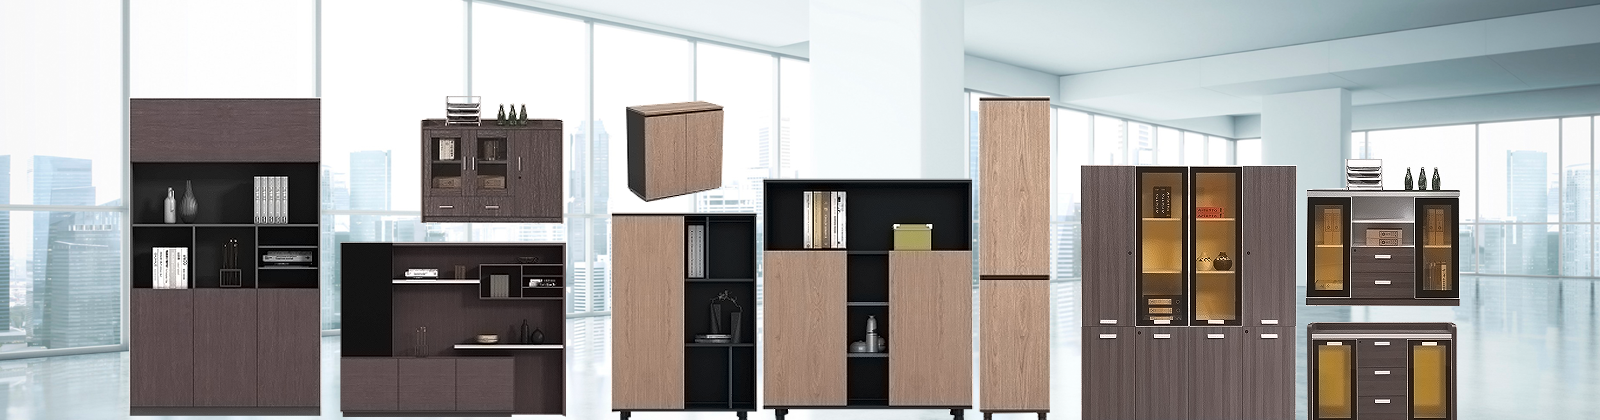 office storage cabinets manufacturer in india